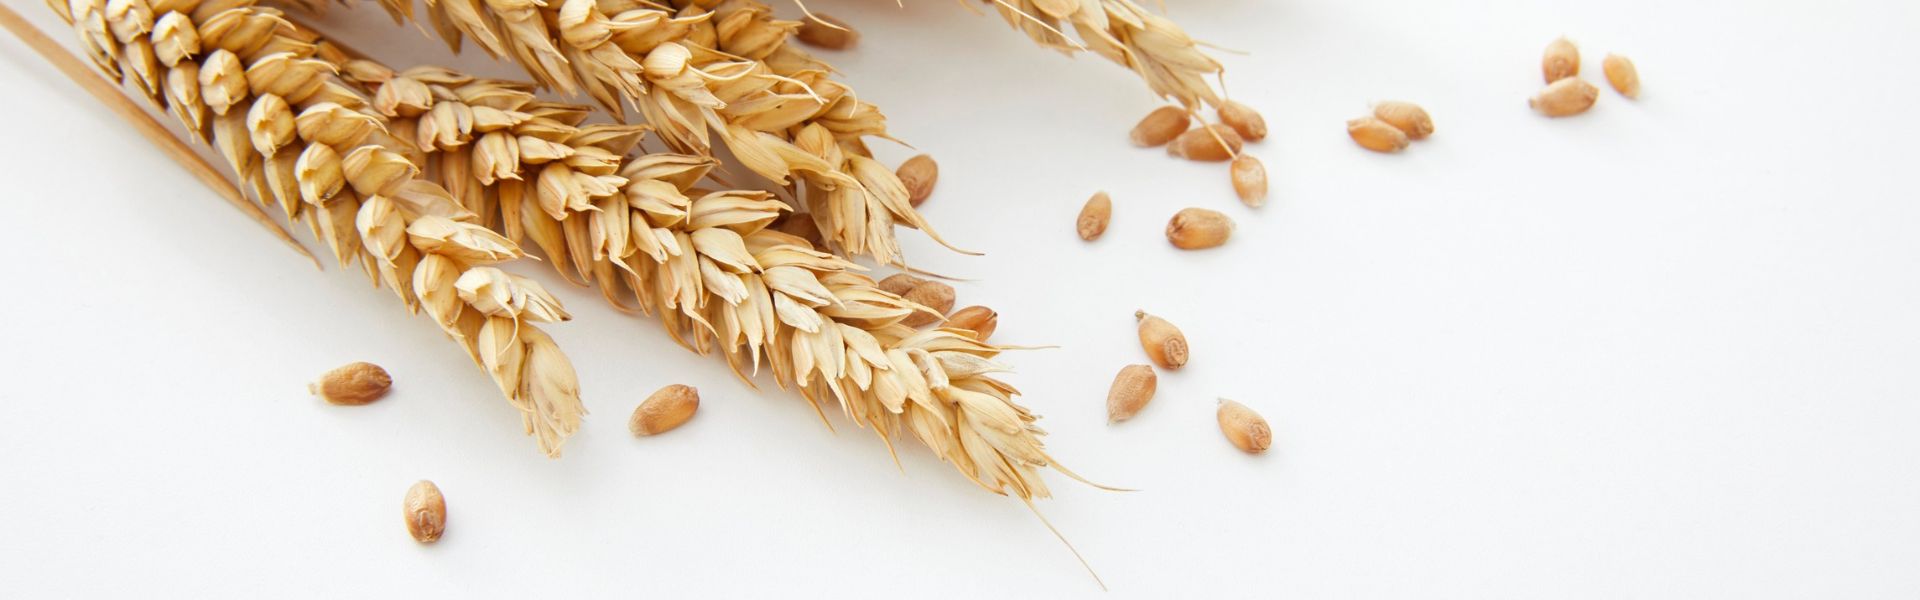 Wheat Allergies Treatment in Homeopathy